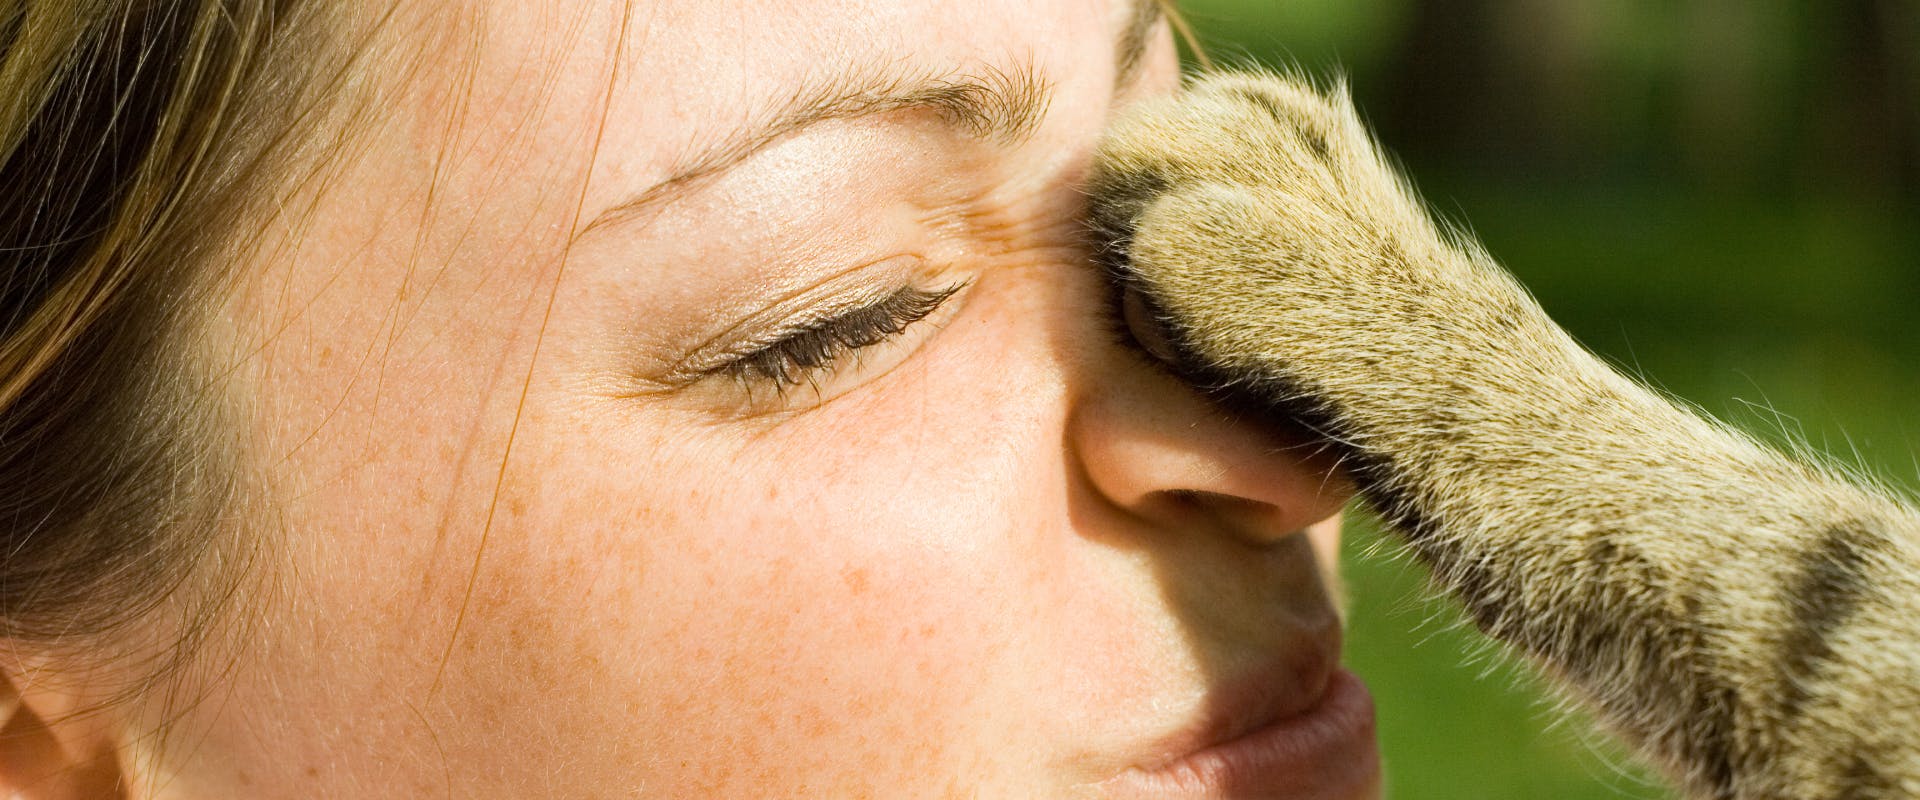 a tabby cat placing its paw on a human's nose